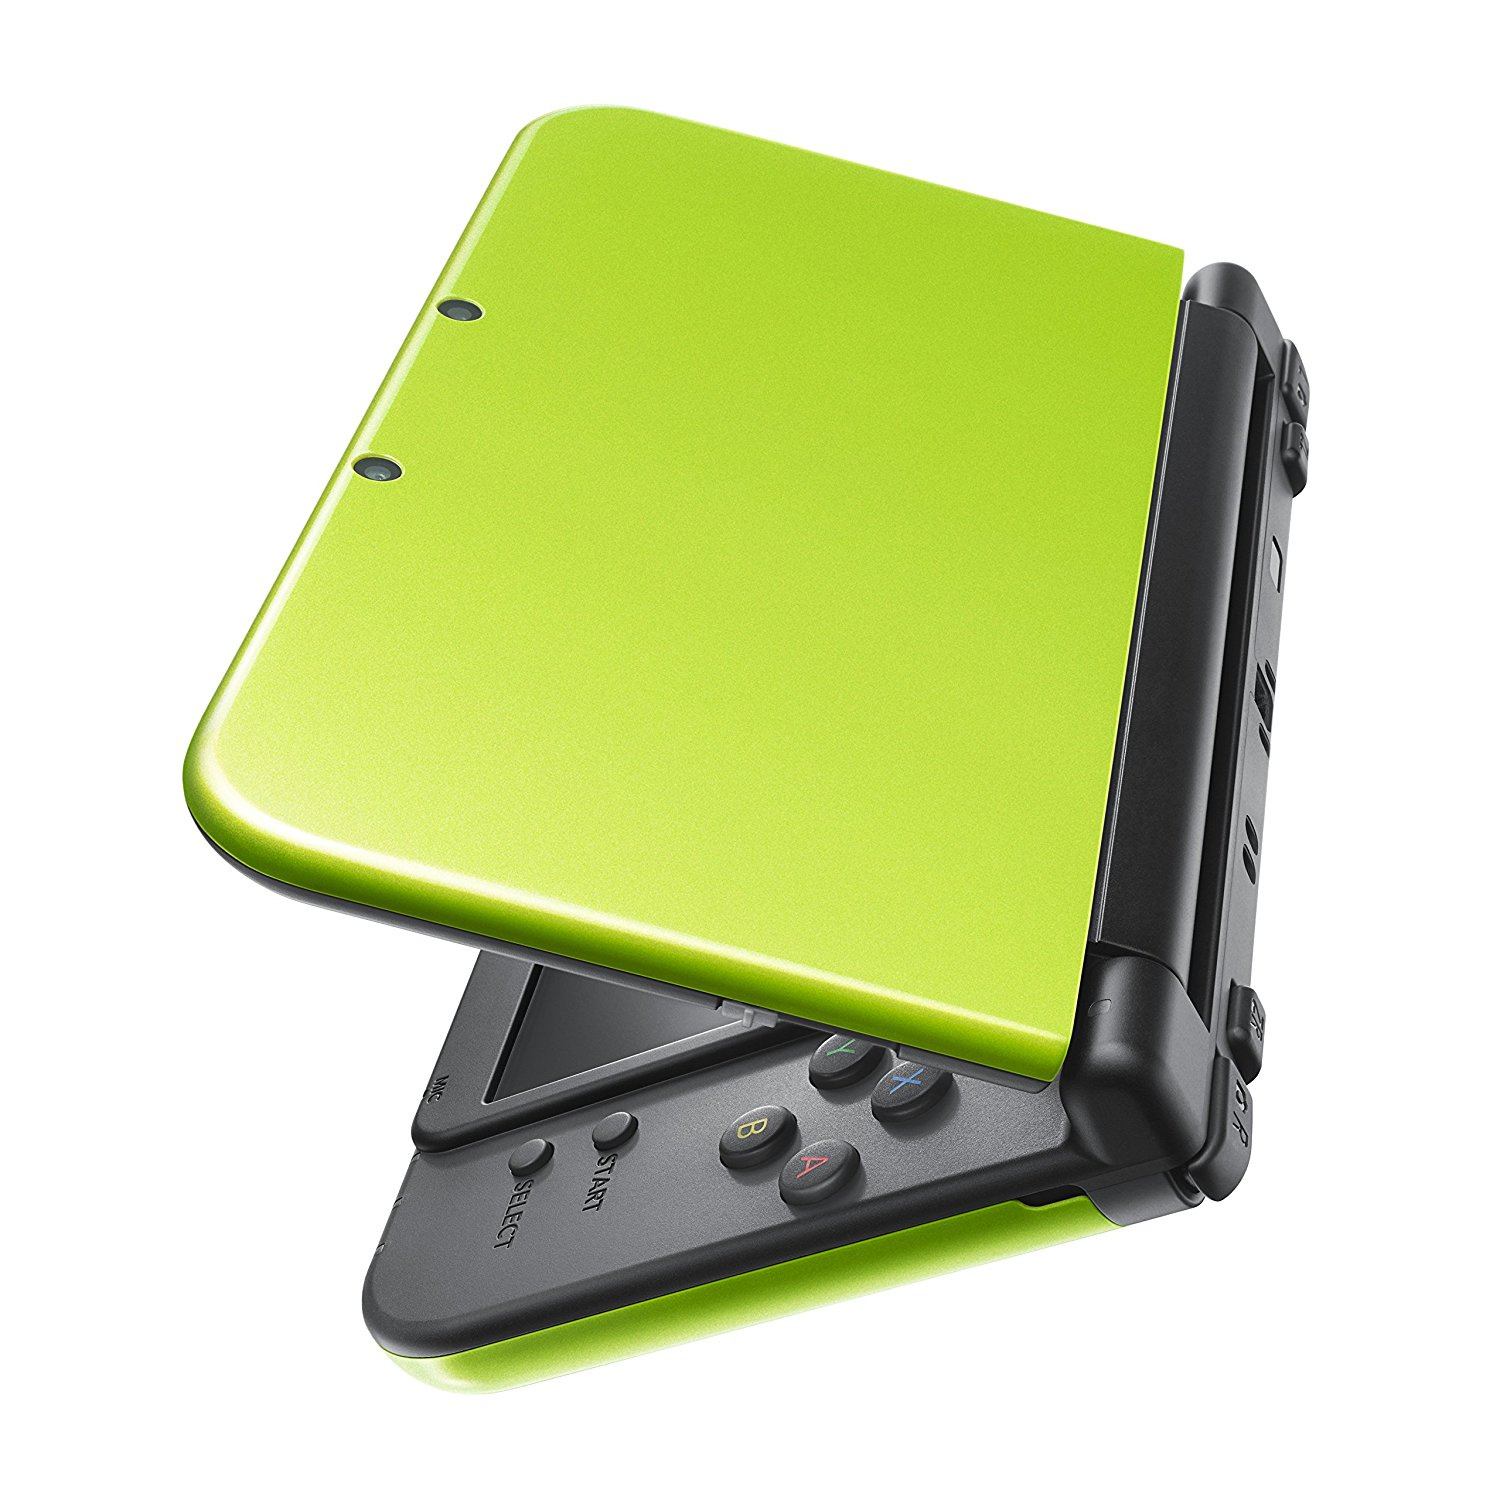 Amazon Exclusive Lime Green New Nintendo 3ds Xl Special Edition Is Now Available In North America Nintendo Life